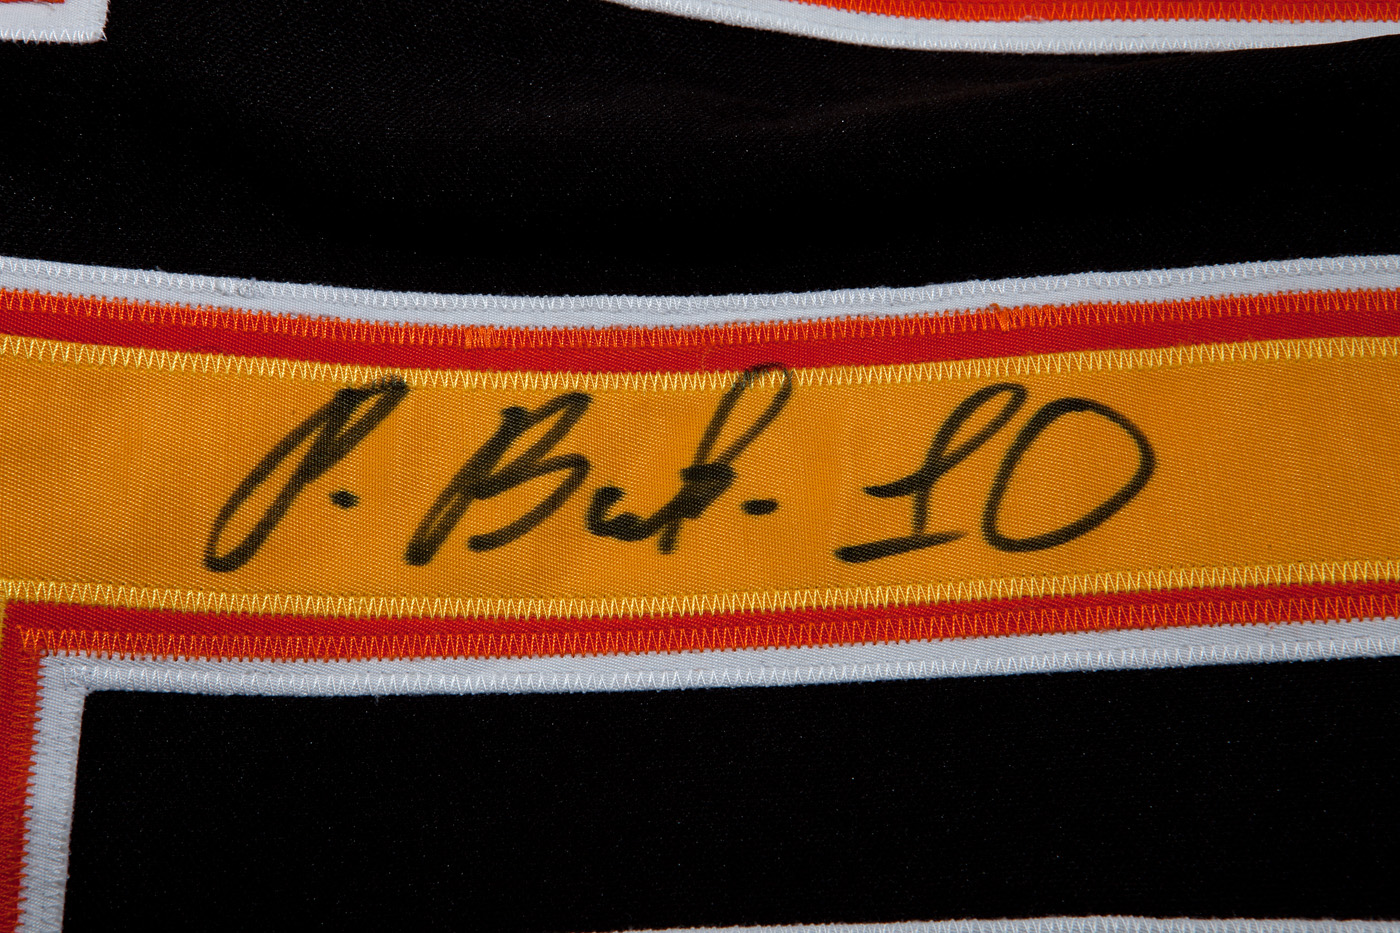 Lot Detail - 1991-92 PAVEL BURE AUTOGRAPHED VANCOUVER CANUCKS GAME WORN  (ROOKIE SEASON) ROAD JERSEY WITH OVER A DOZEN TEAM REPAIRS (CANUCKS LOA,  NSM COLLECTION)